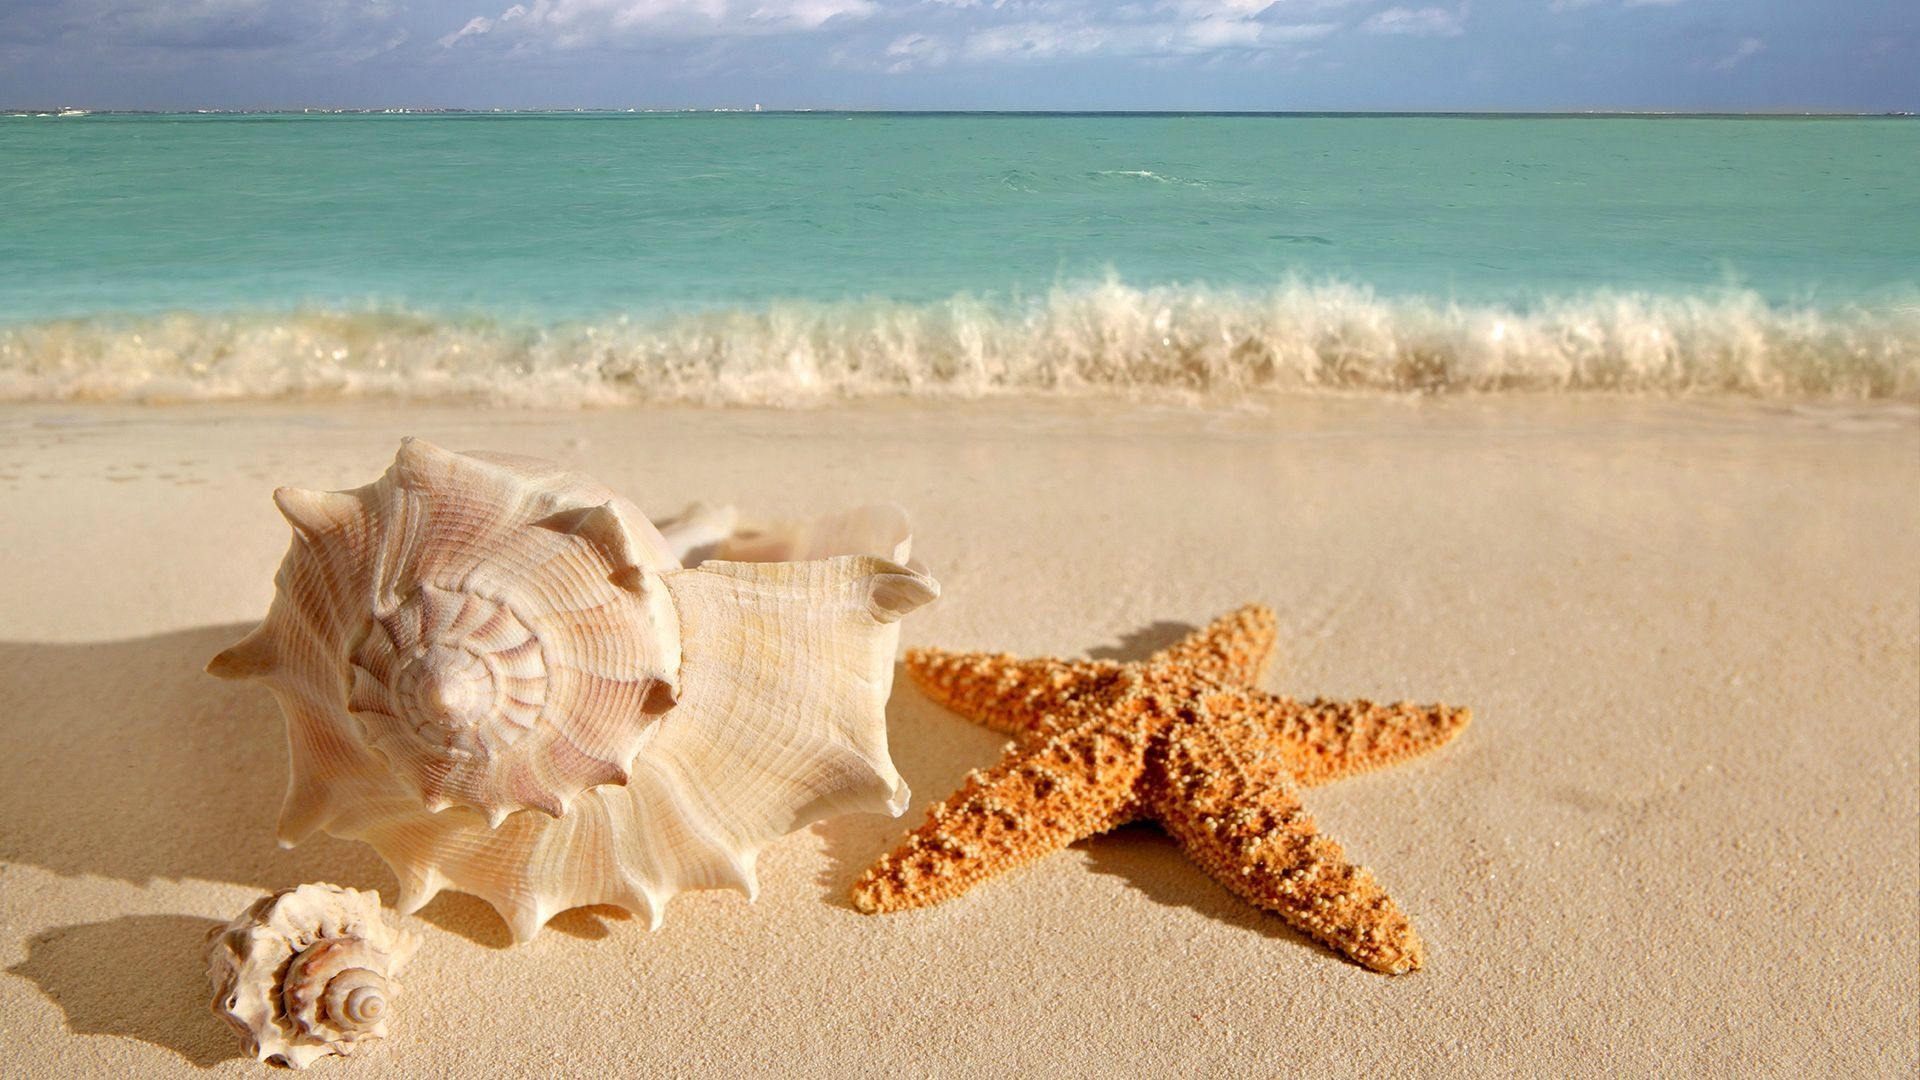 A starfish and shell sitting on the beach - Starfish